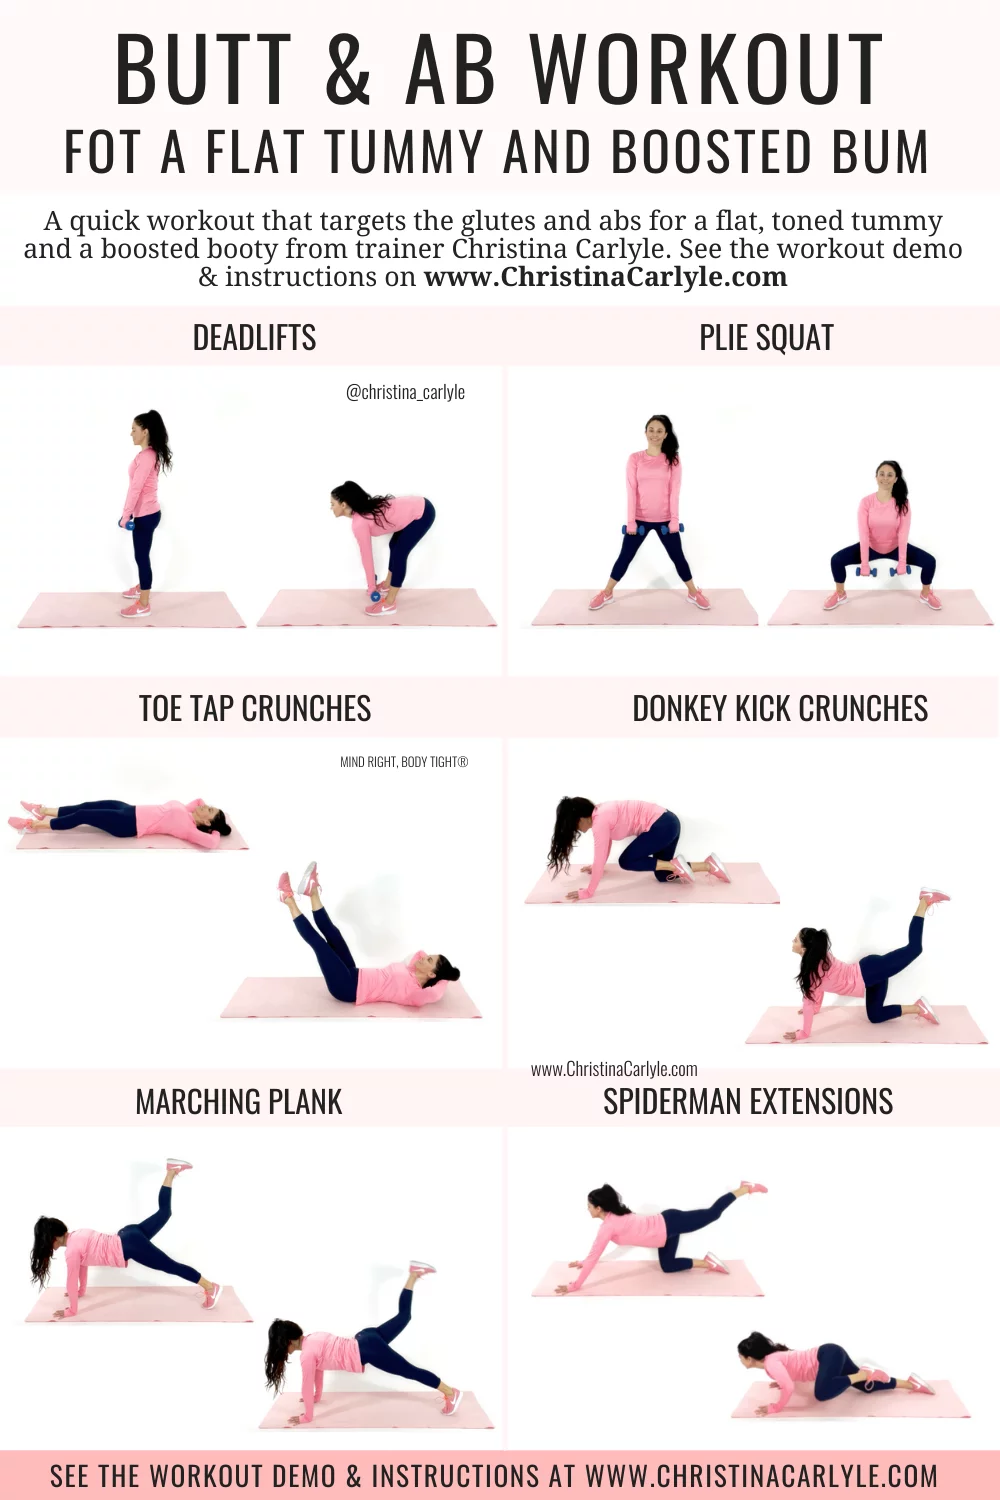 9 Best Butt Workouts - Fast Butt Exercises to Do At Home